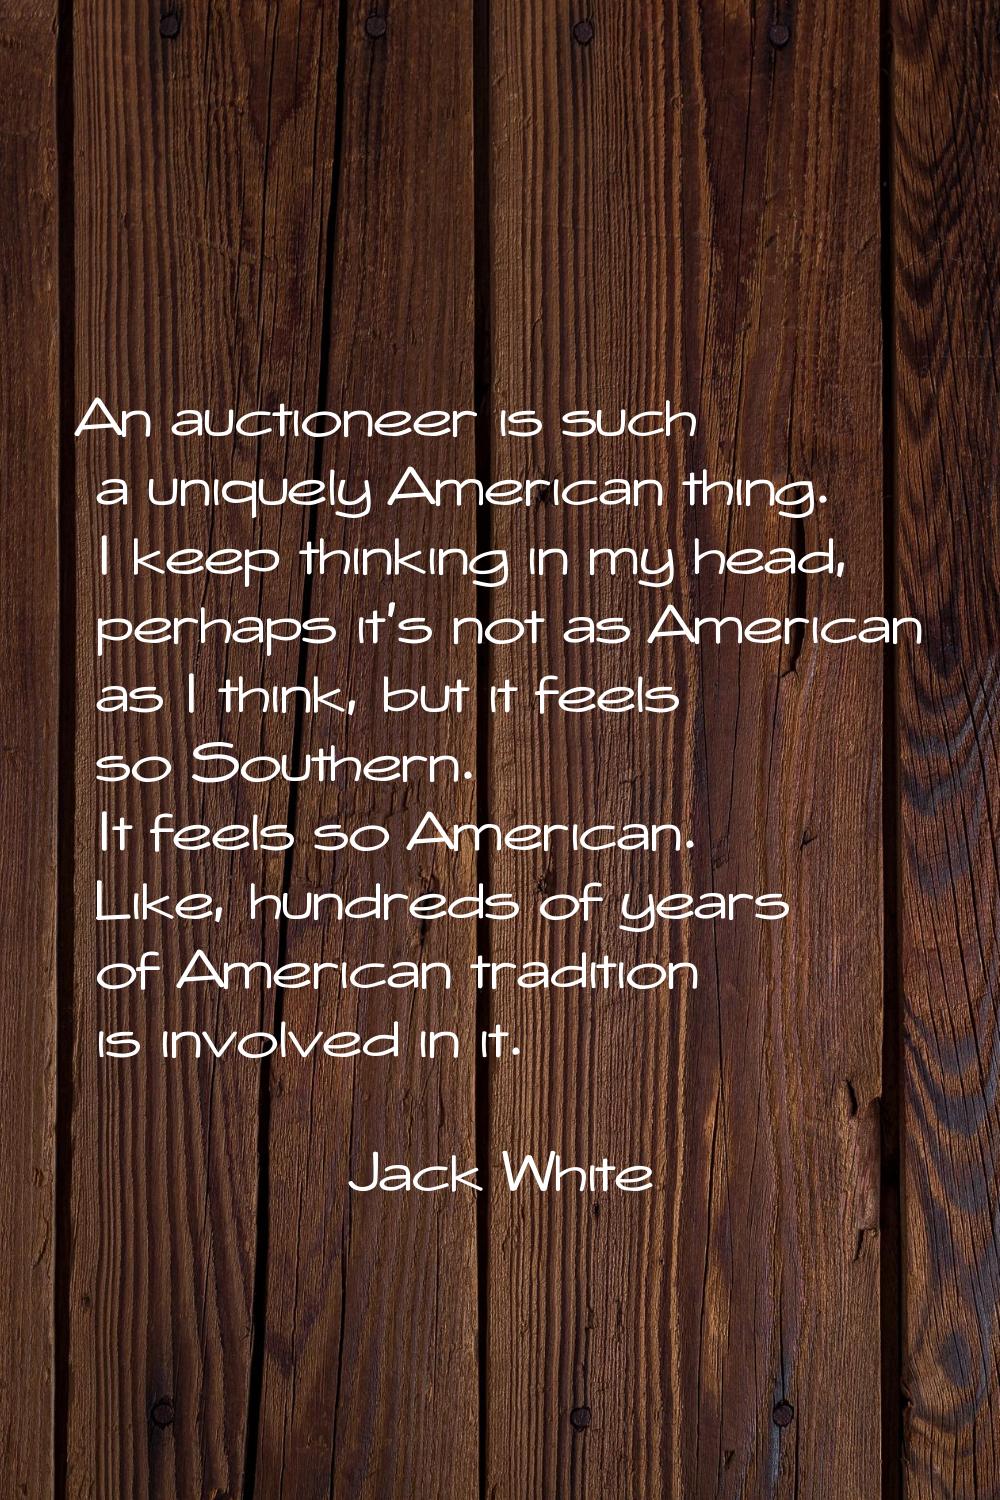 An auctioneer is such a uniquely American thing. I keep thinking in my head, perhaps it's not as Am